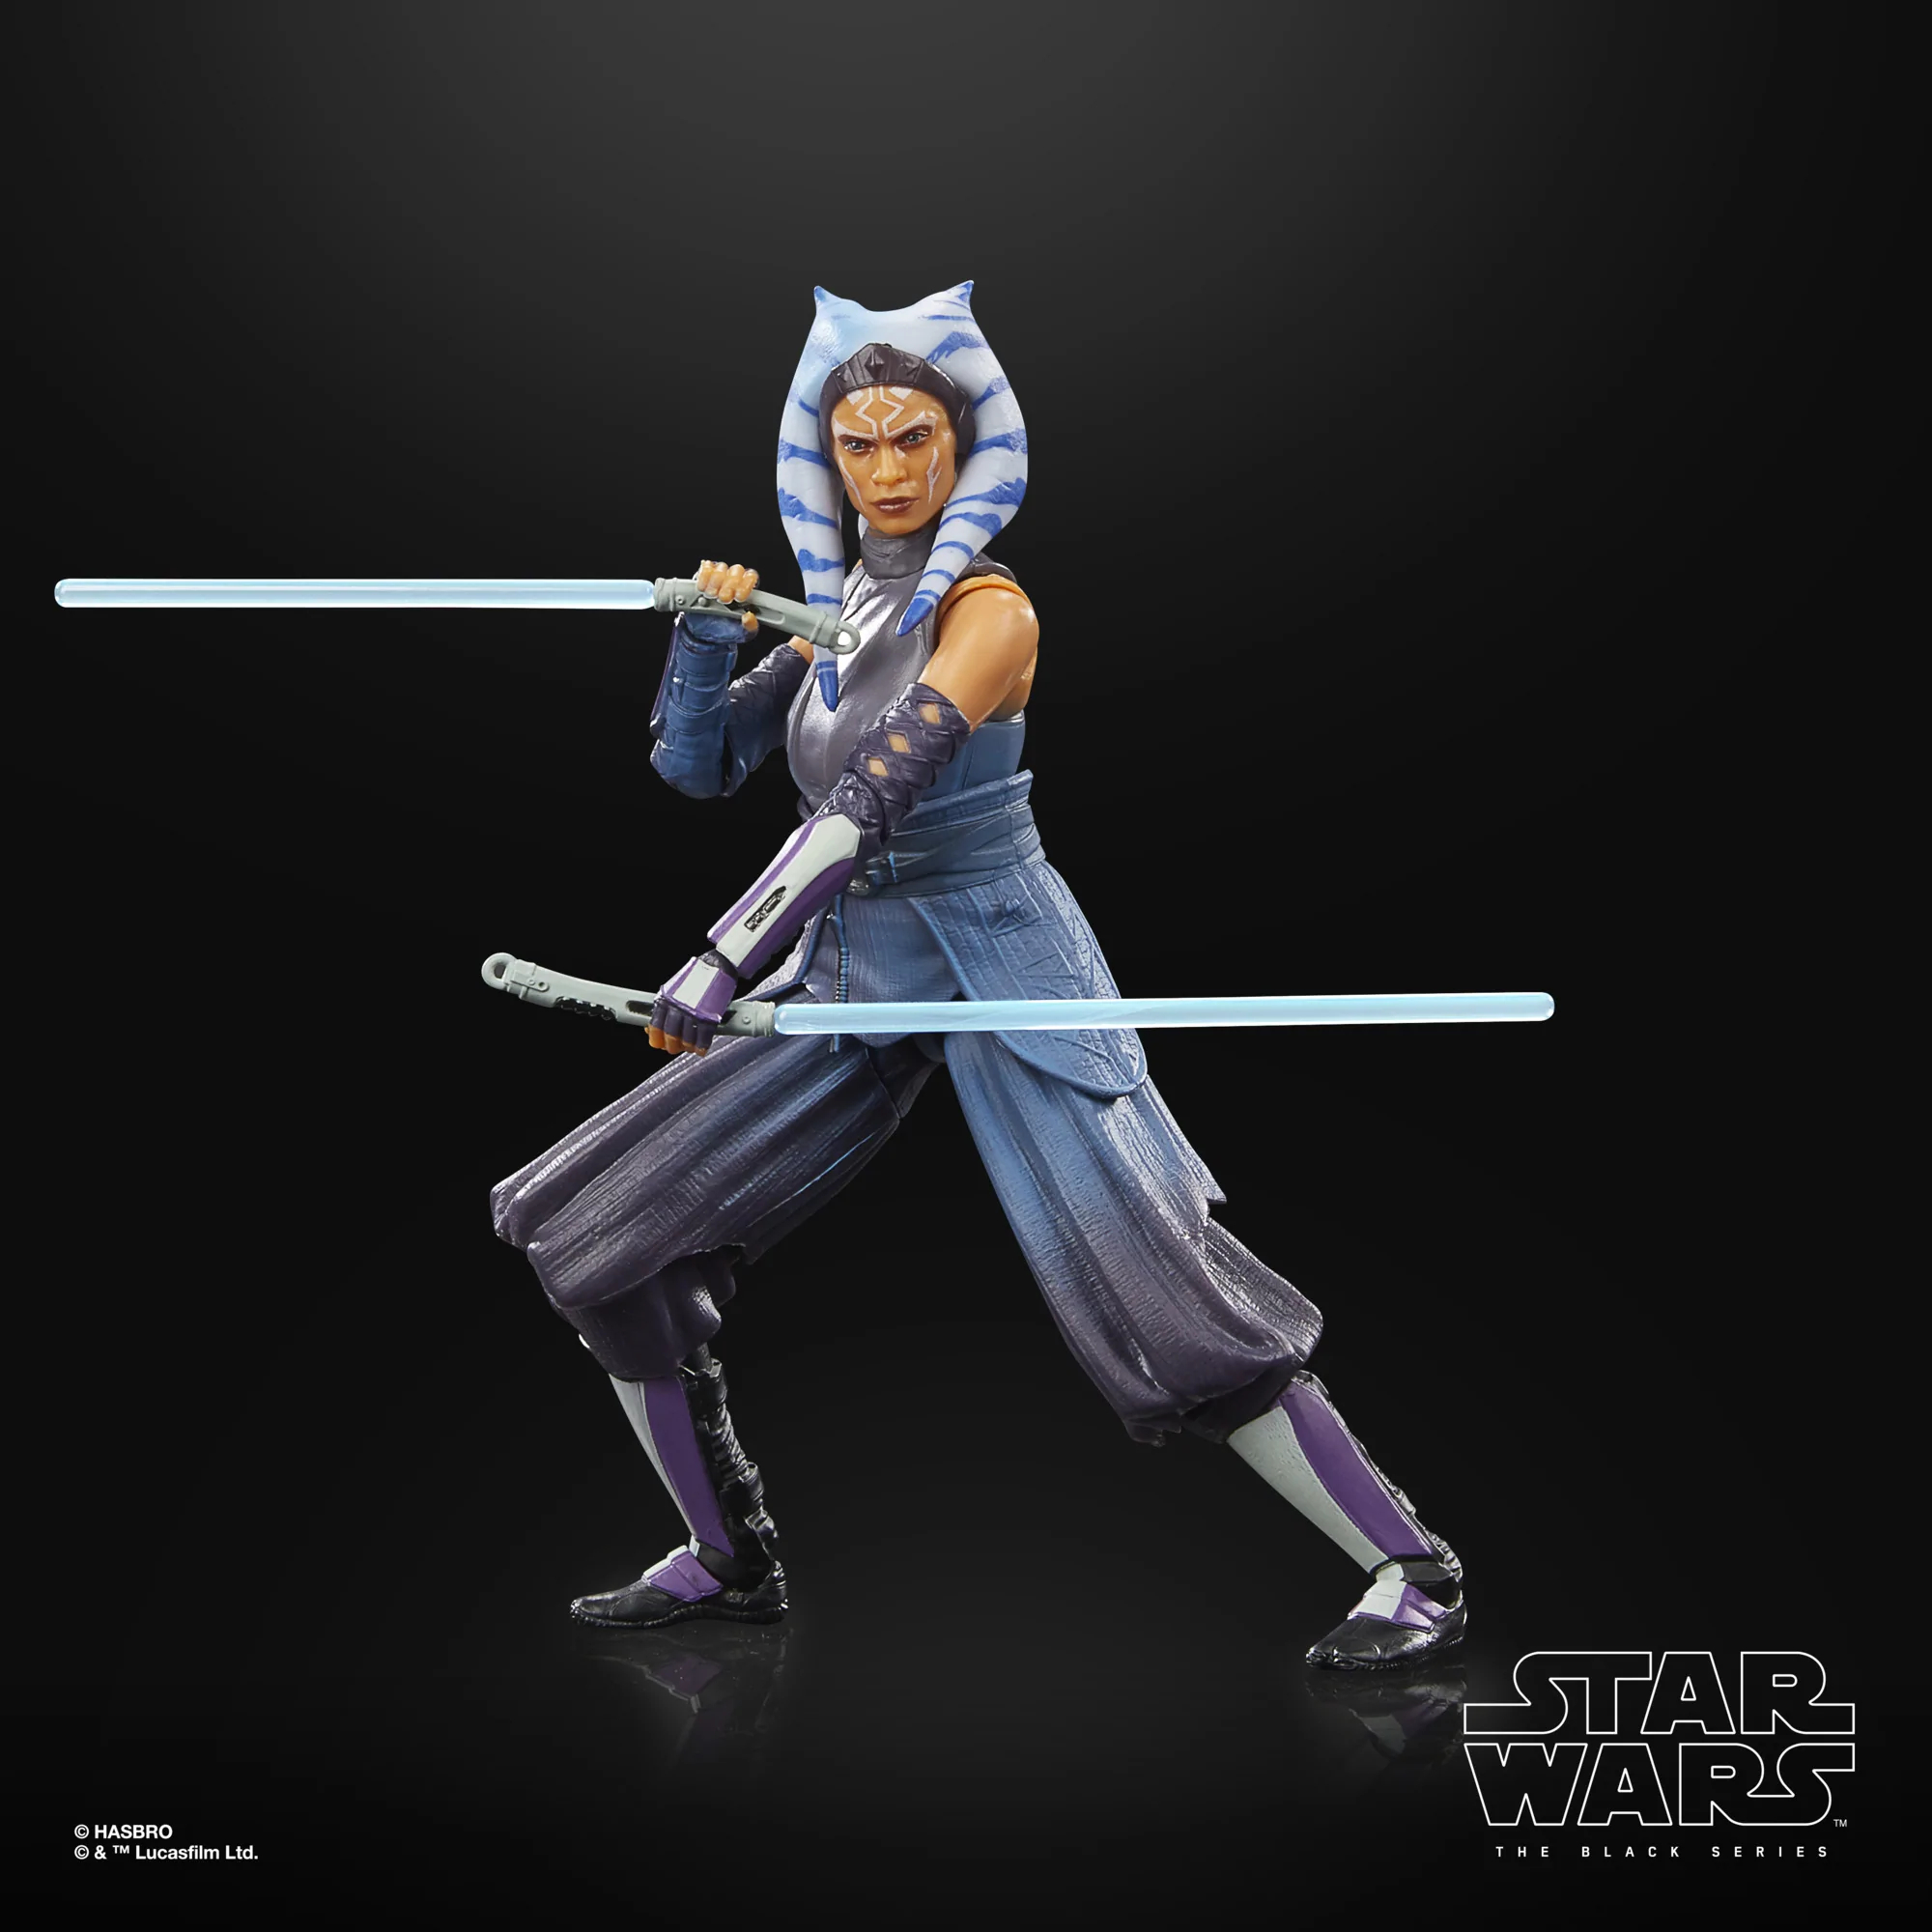 Jedi pose and lightsabers - v1.0 | Stable Diffusion Poses | Civitai